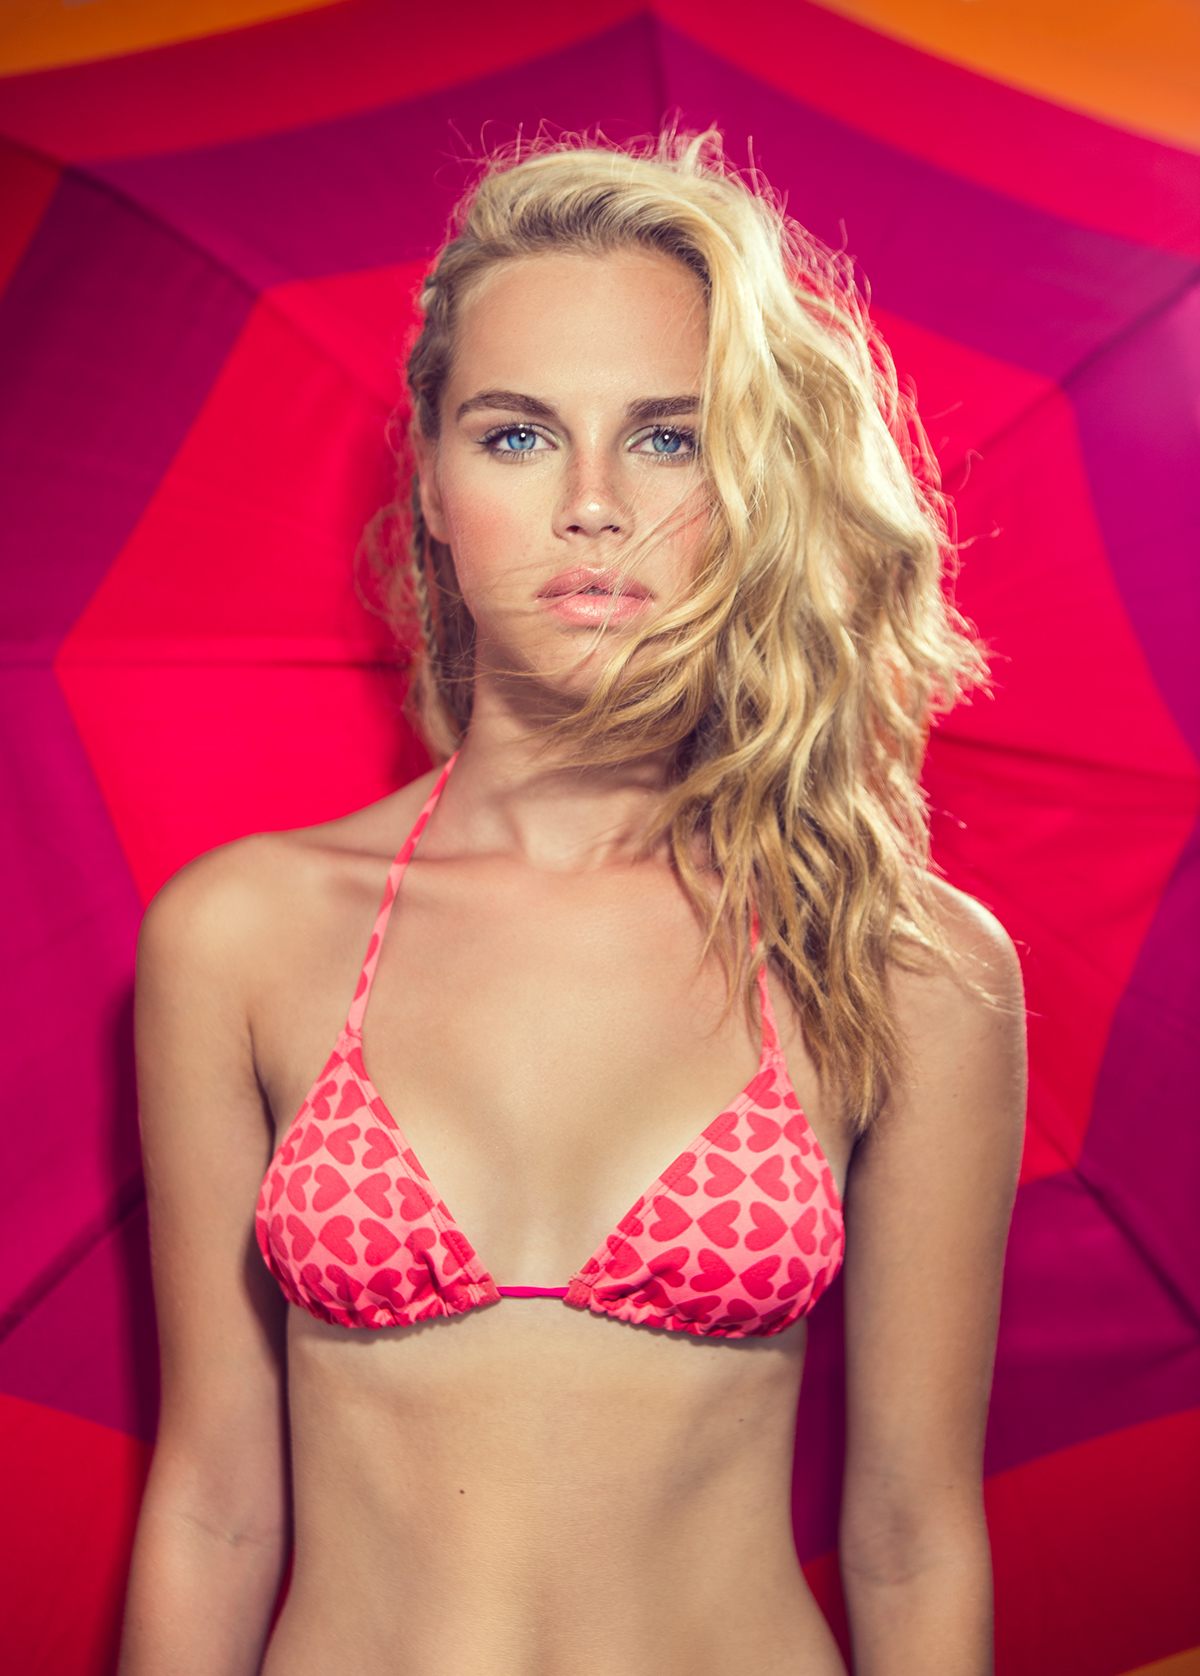 beauty summer swimsuit Susimakeup Andres Henao